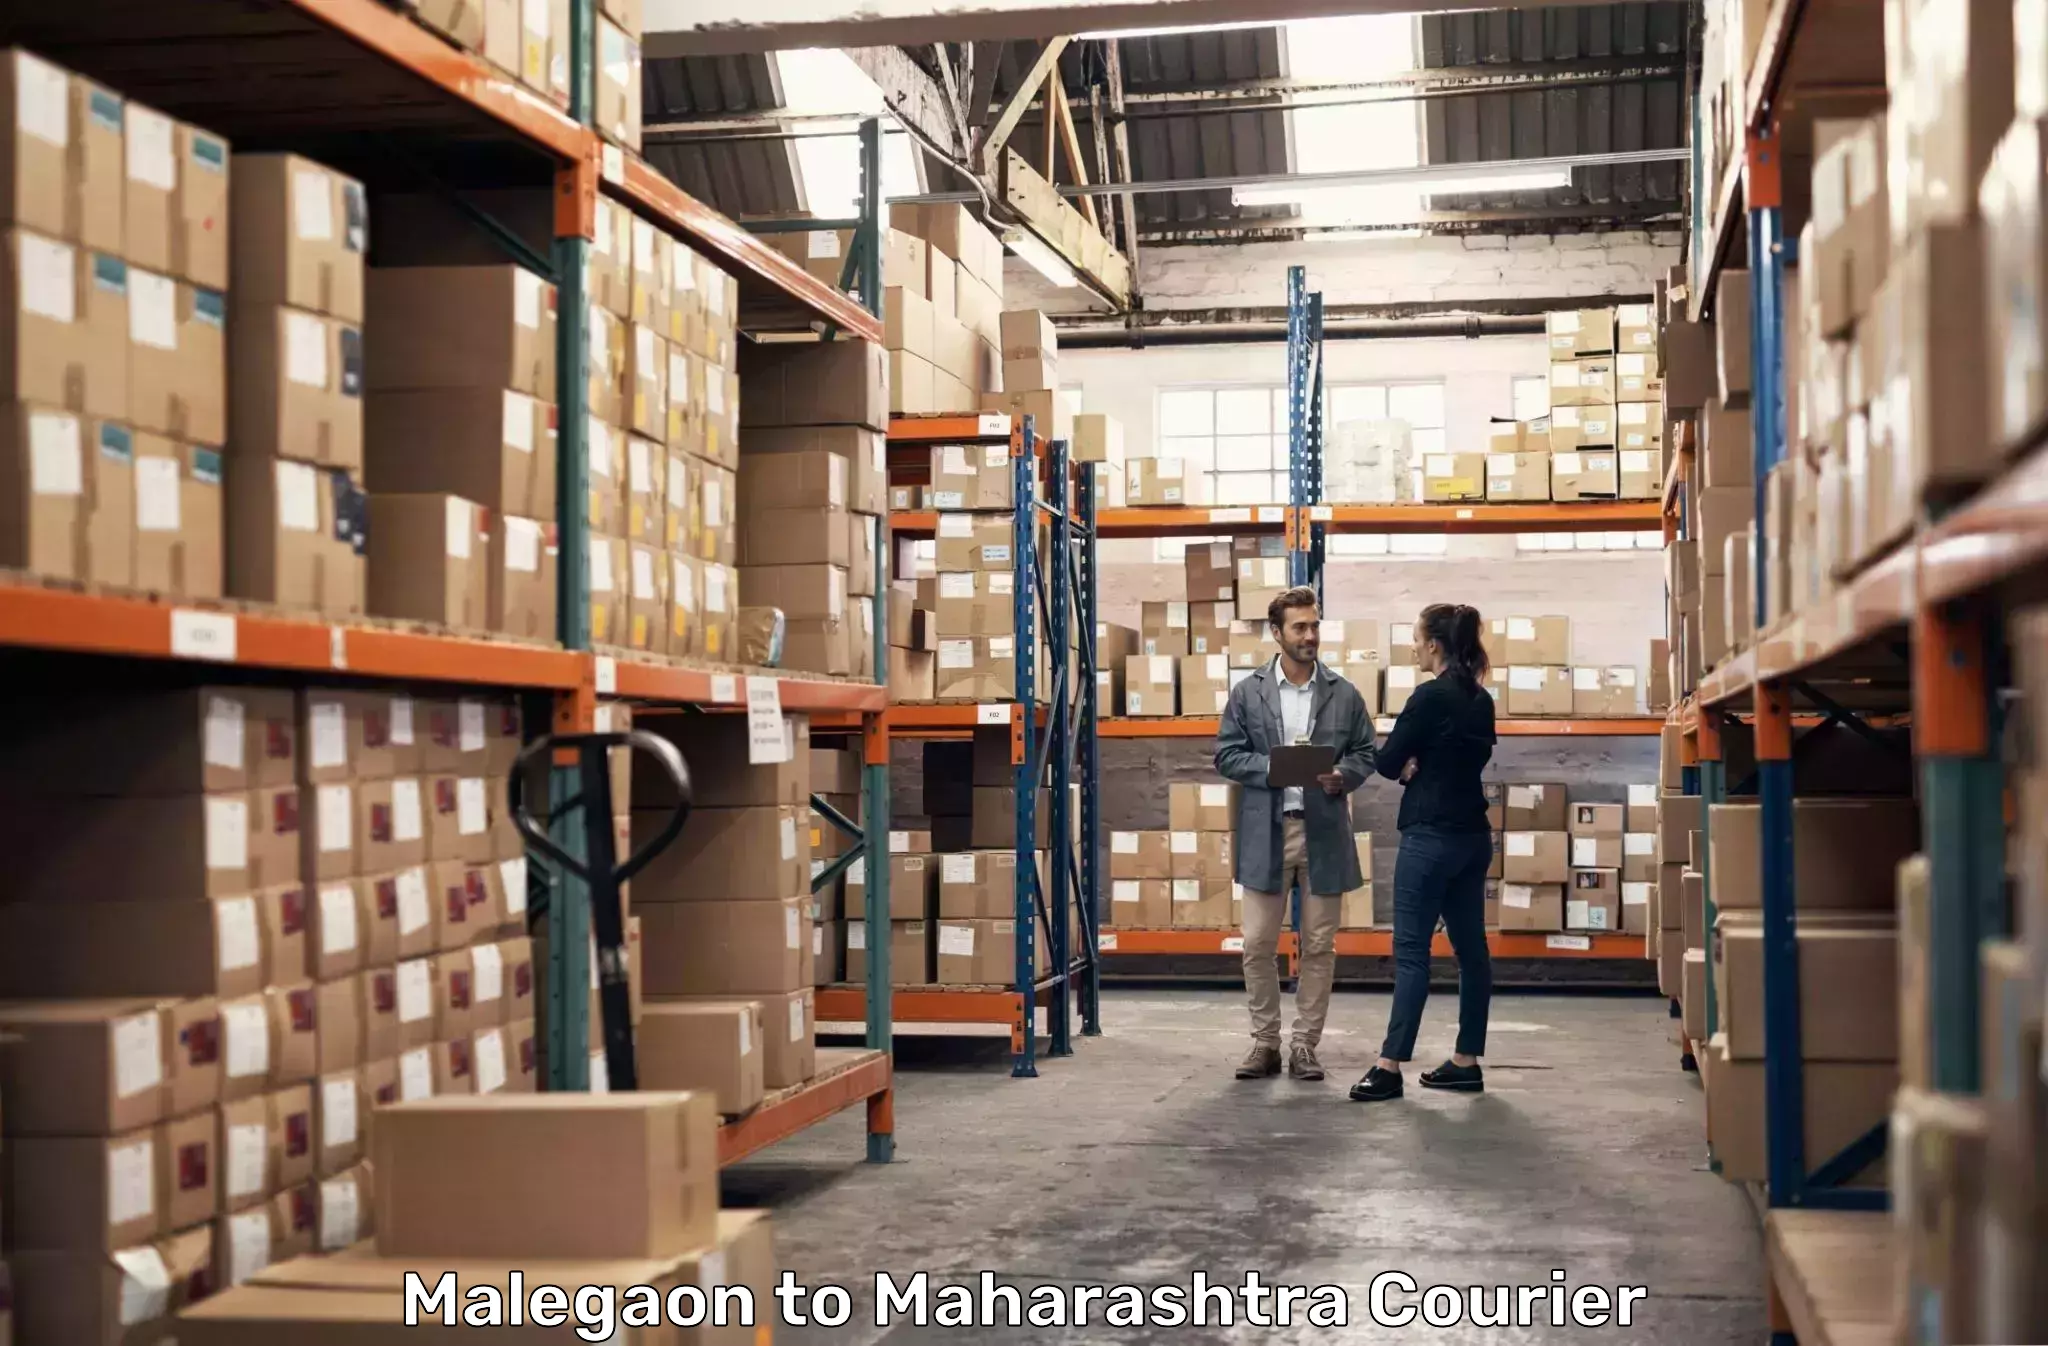 Efficient order fulfillment Malegaon to Parbhani